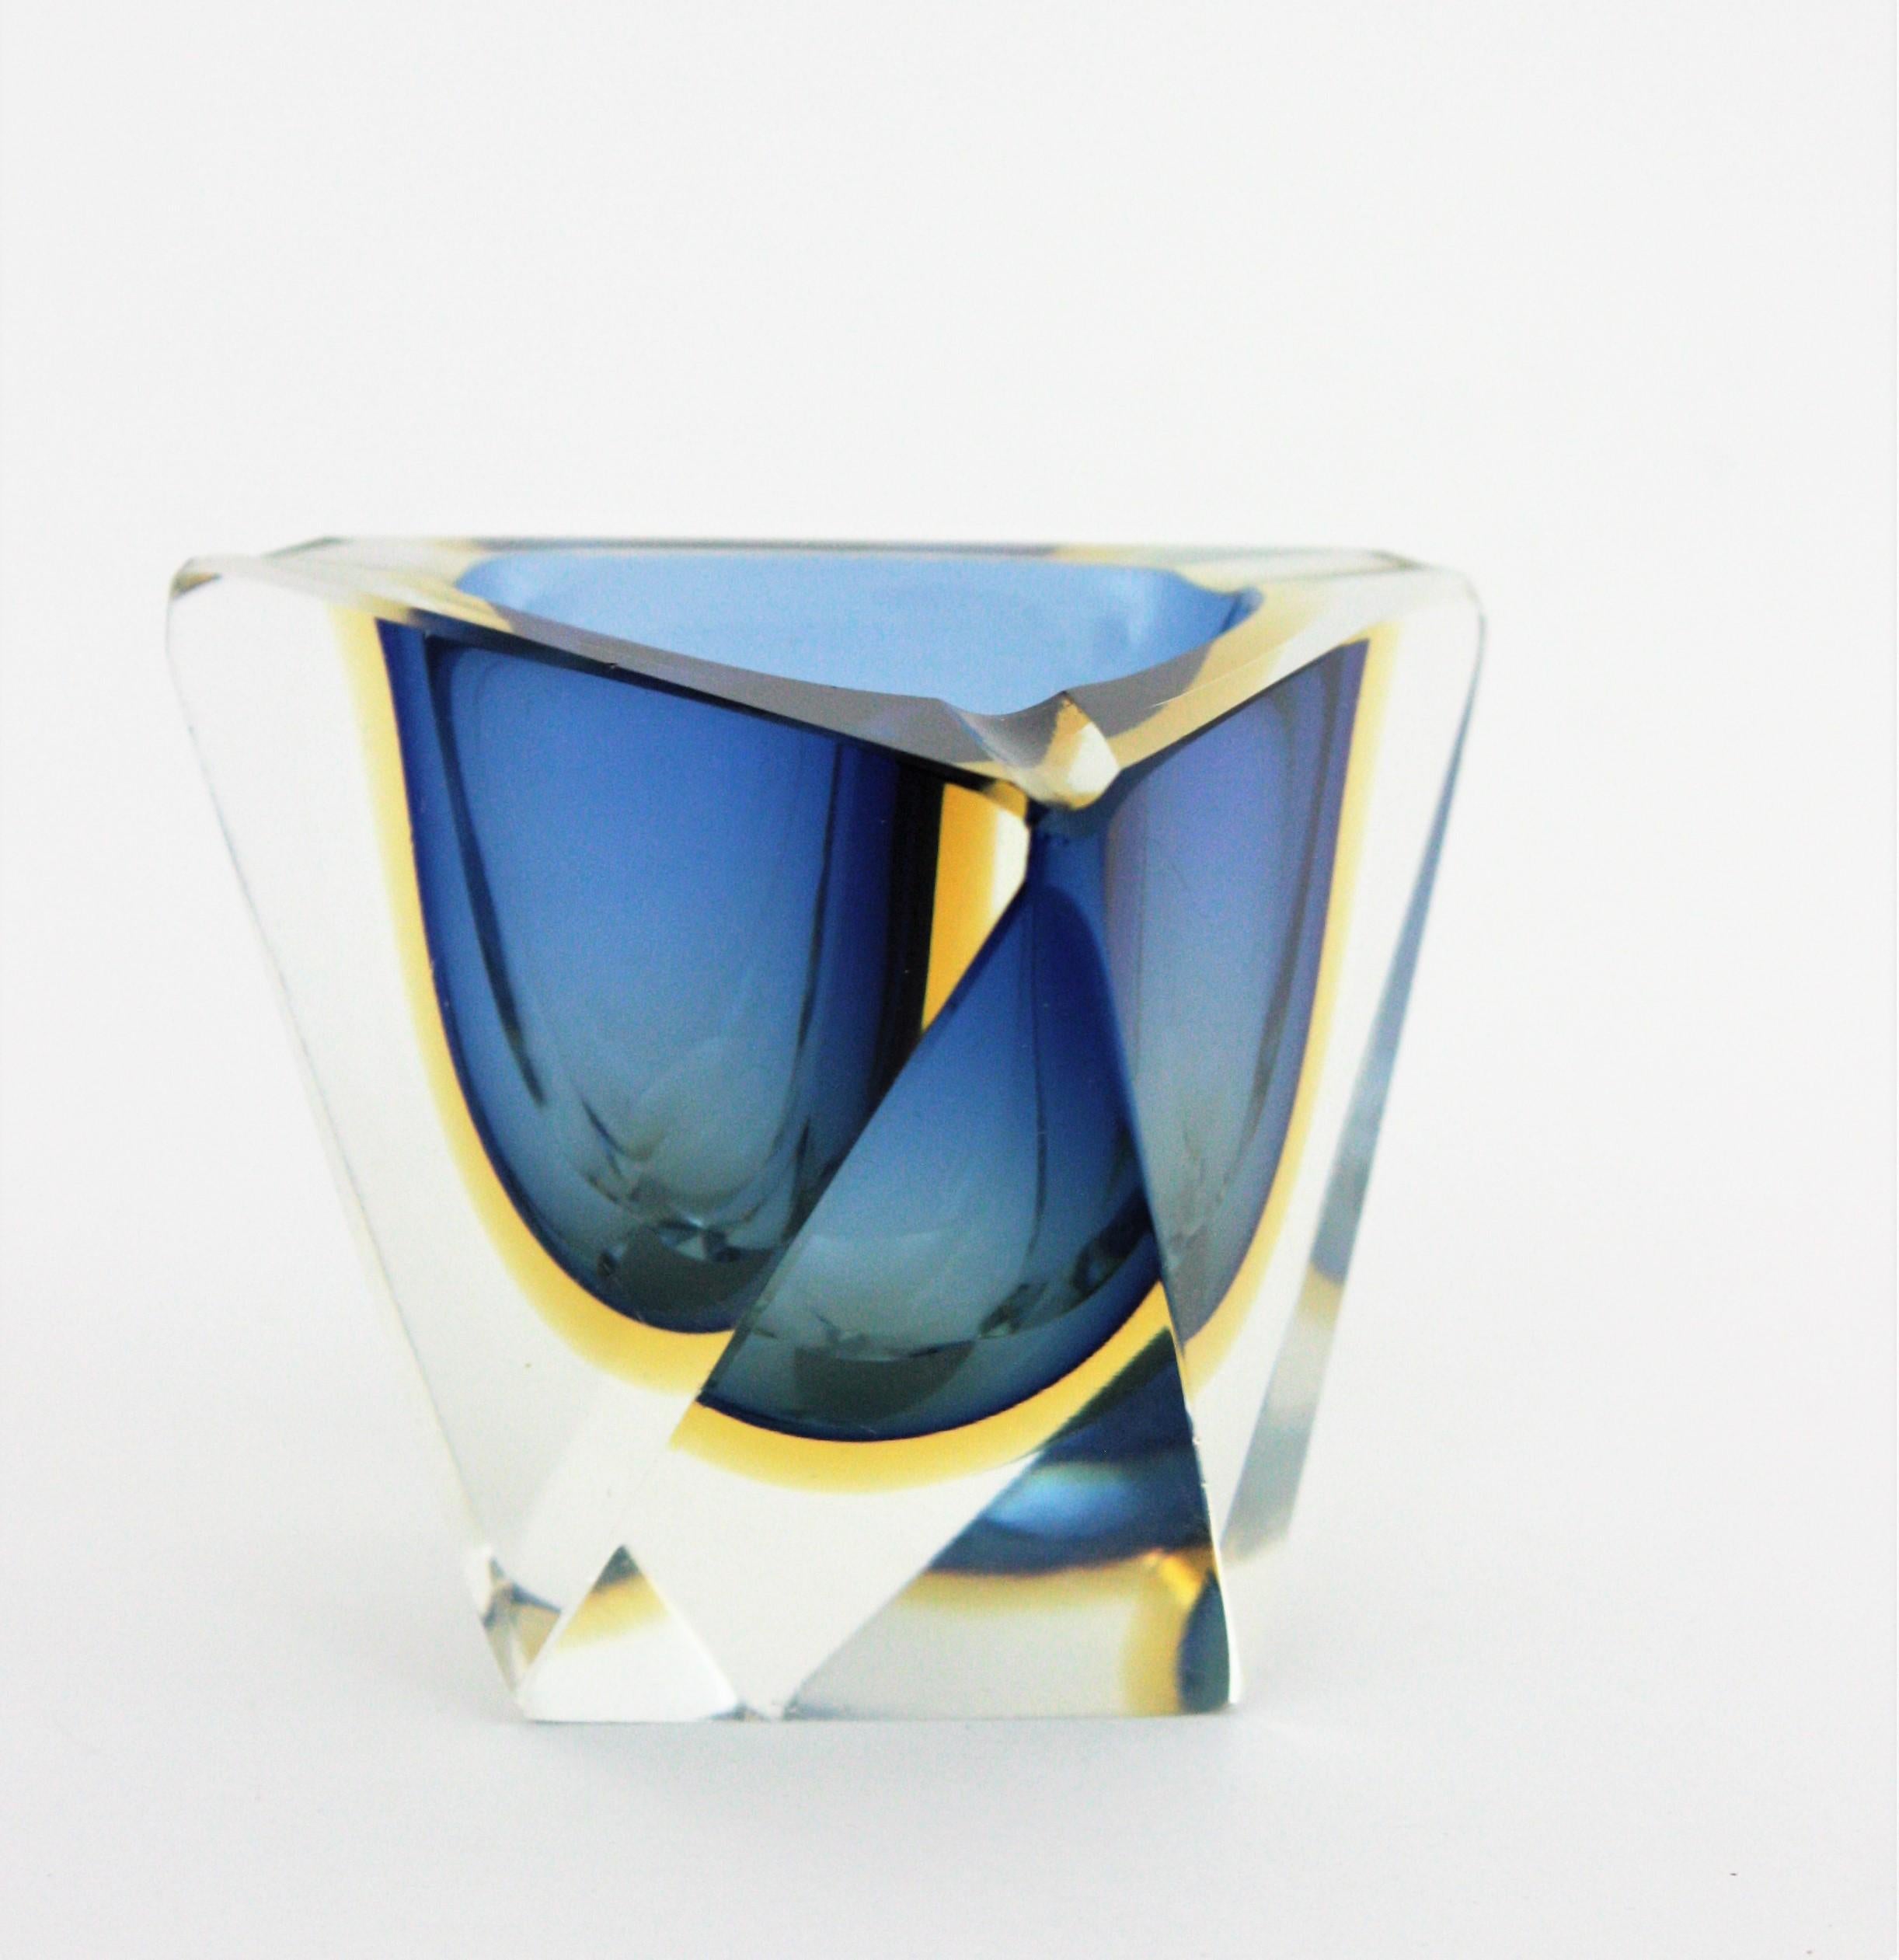 Mid-Century Modern Flavio Poli Murano Sommerso Blue & Yellow Faceted Triangular Glass Ashtray Bowl For Sale